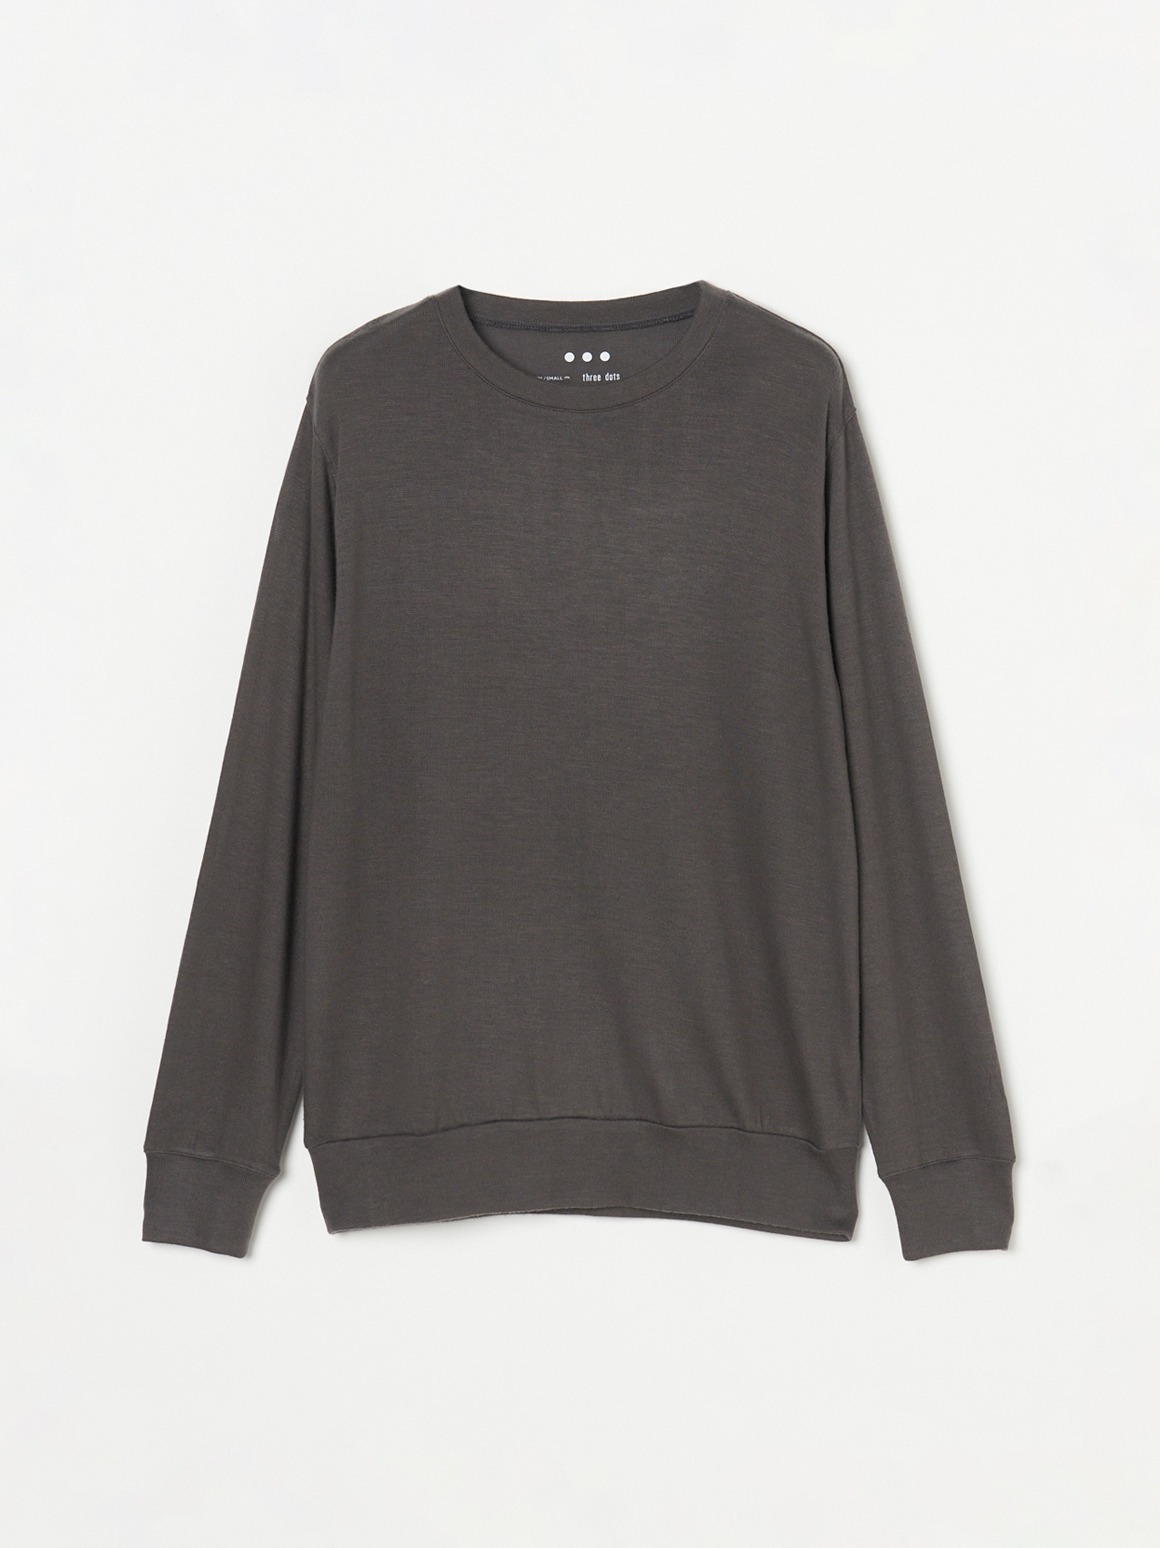 Brushed sweater simple crew neck 詳細画像 charcoal 1